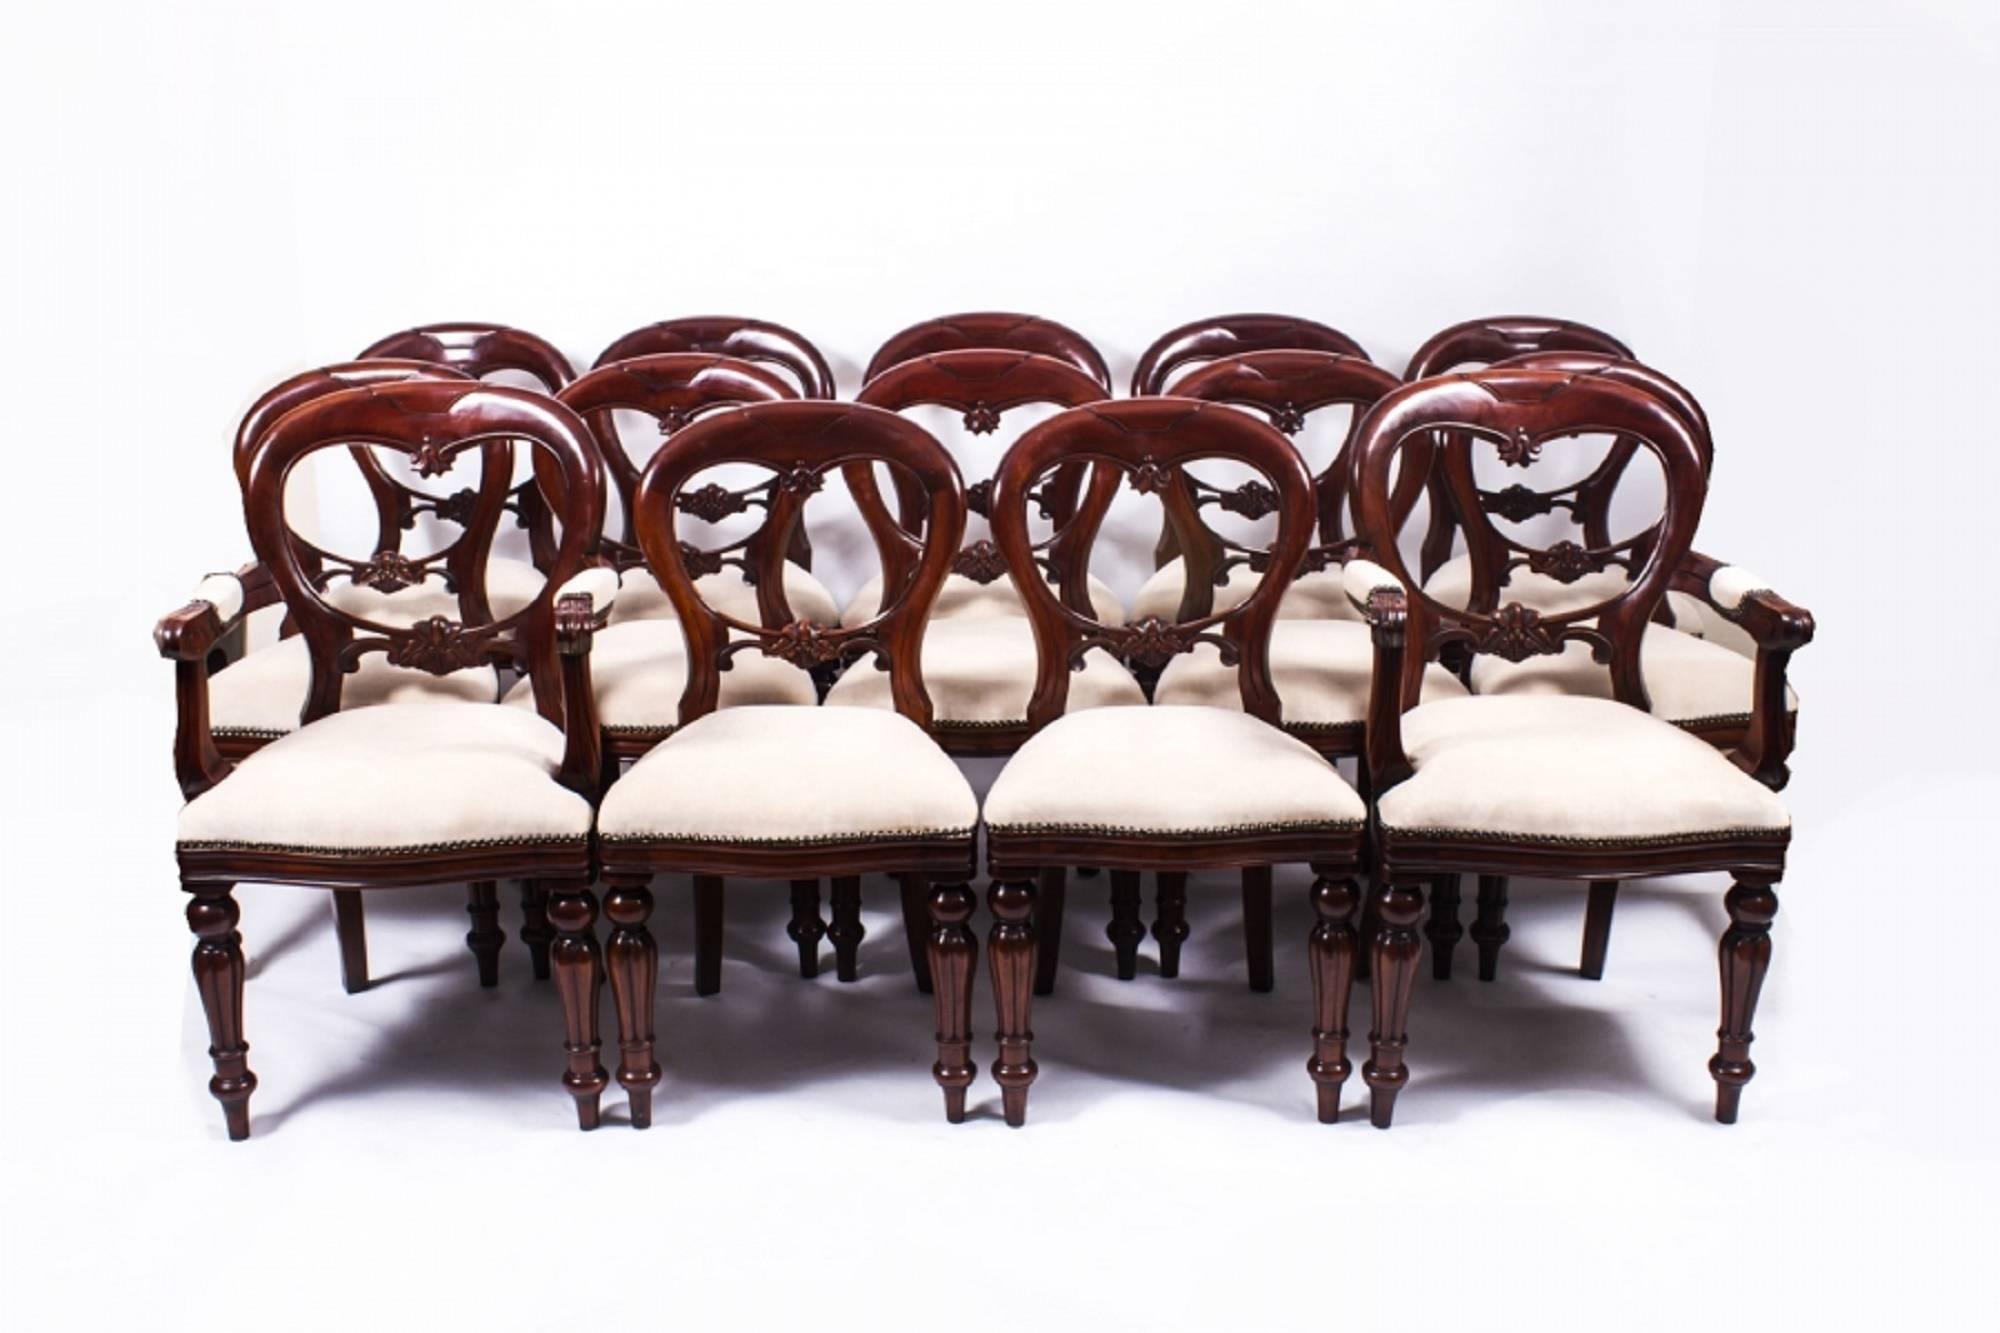 Mid-19th Century Antique Victorian Dining Table and 14 chairs, circa 1850